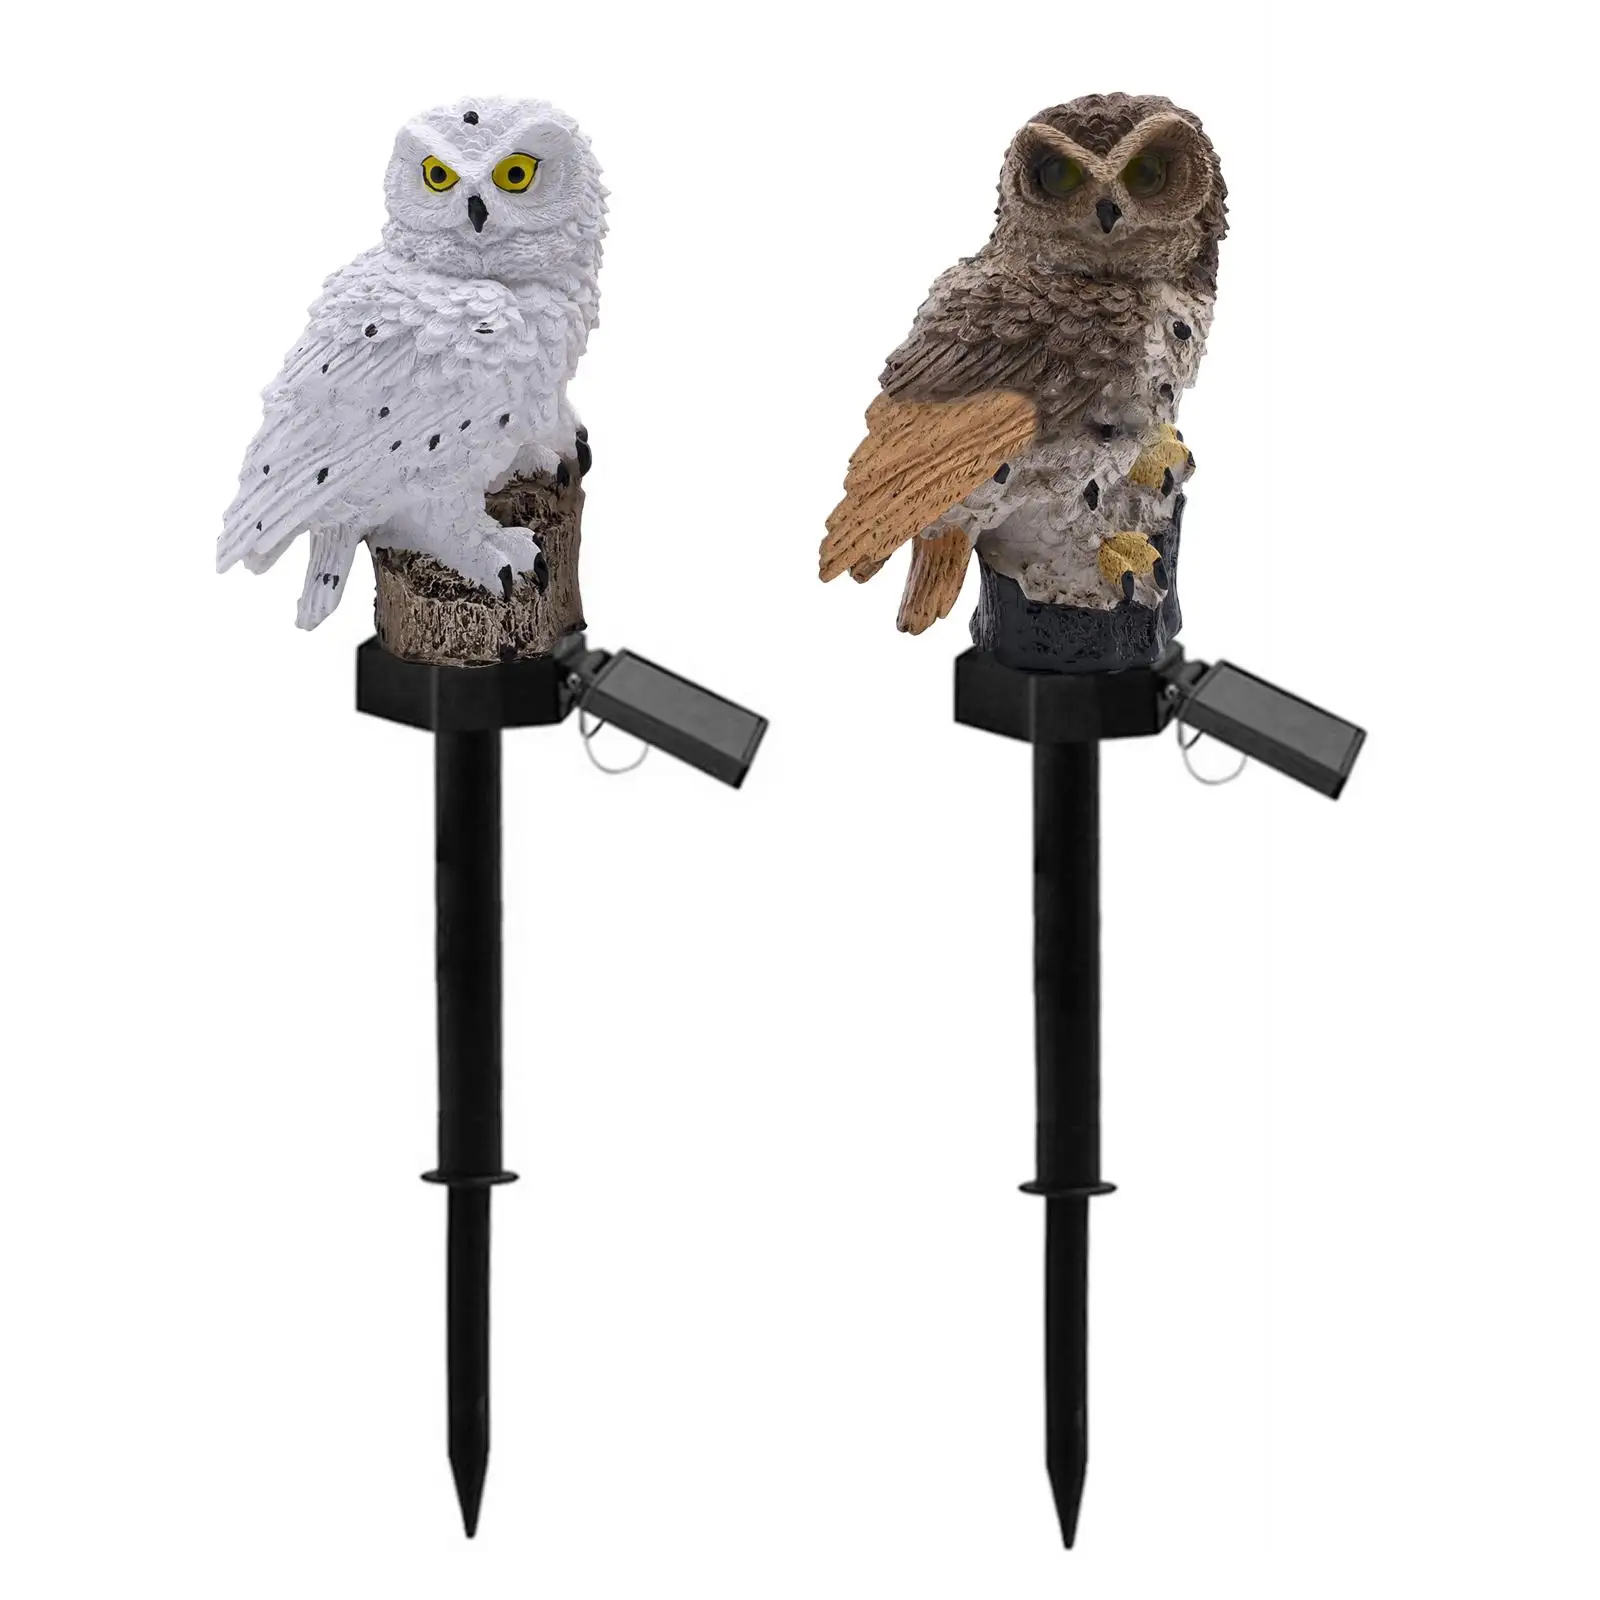 Owl Shape Lawn Light with Stake Solar LED Lights Creative Resin Night Lights for Outdoor Lighting Christmas Garden Ornament Yard